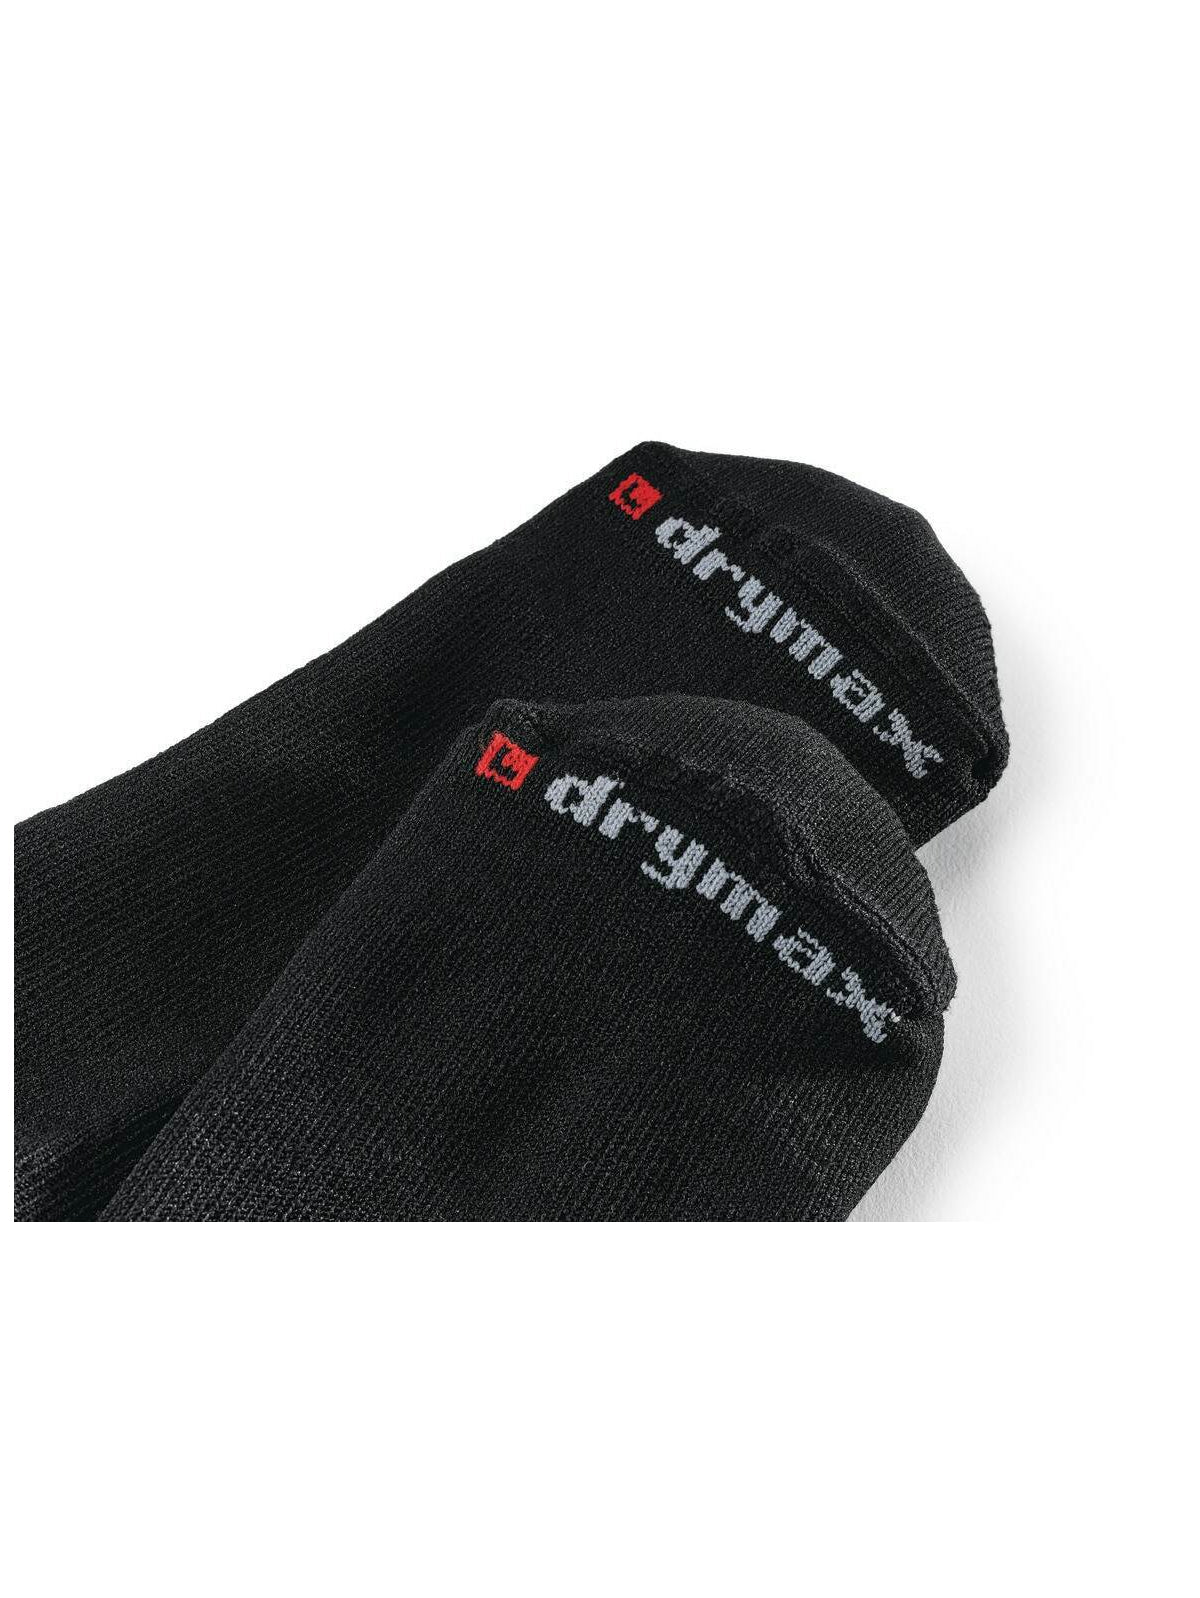 Unisex Crew Socks Black by  Shoes For Crews.